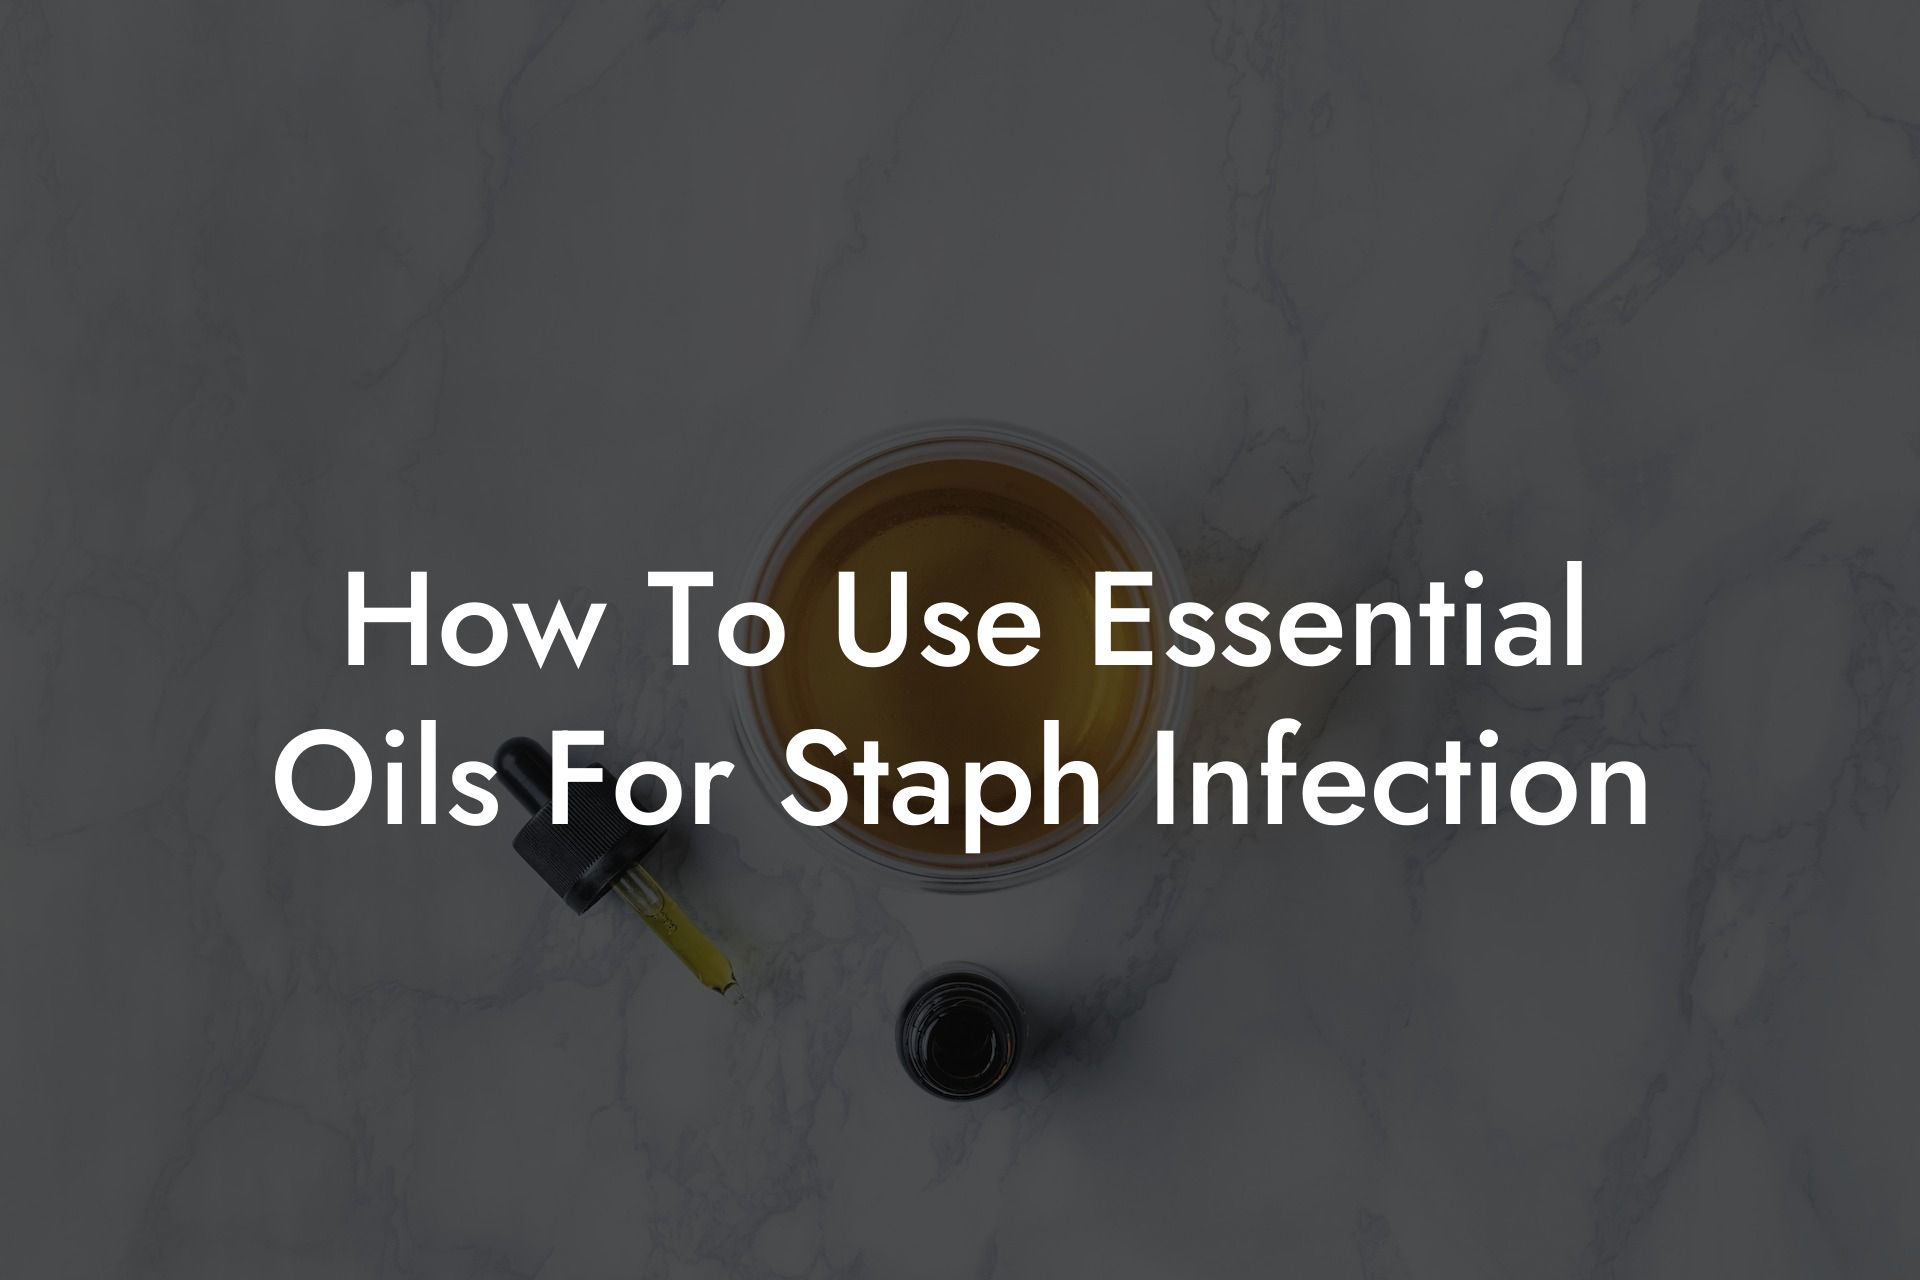 How To Use Essential Oils For Staph Infection